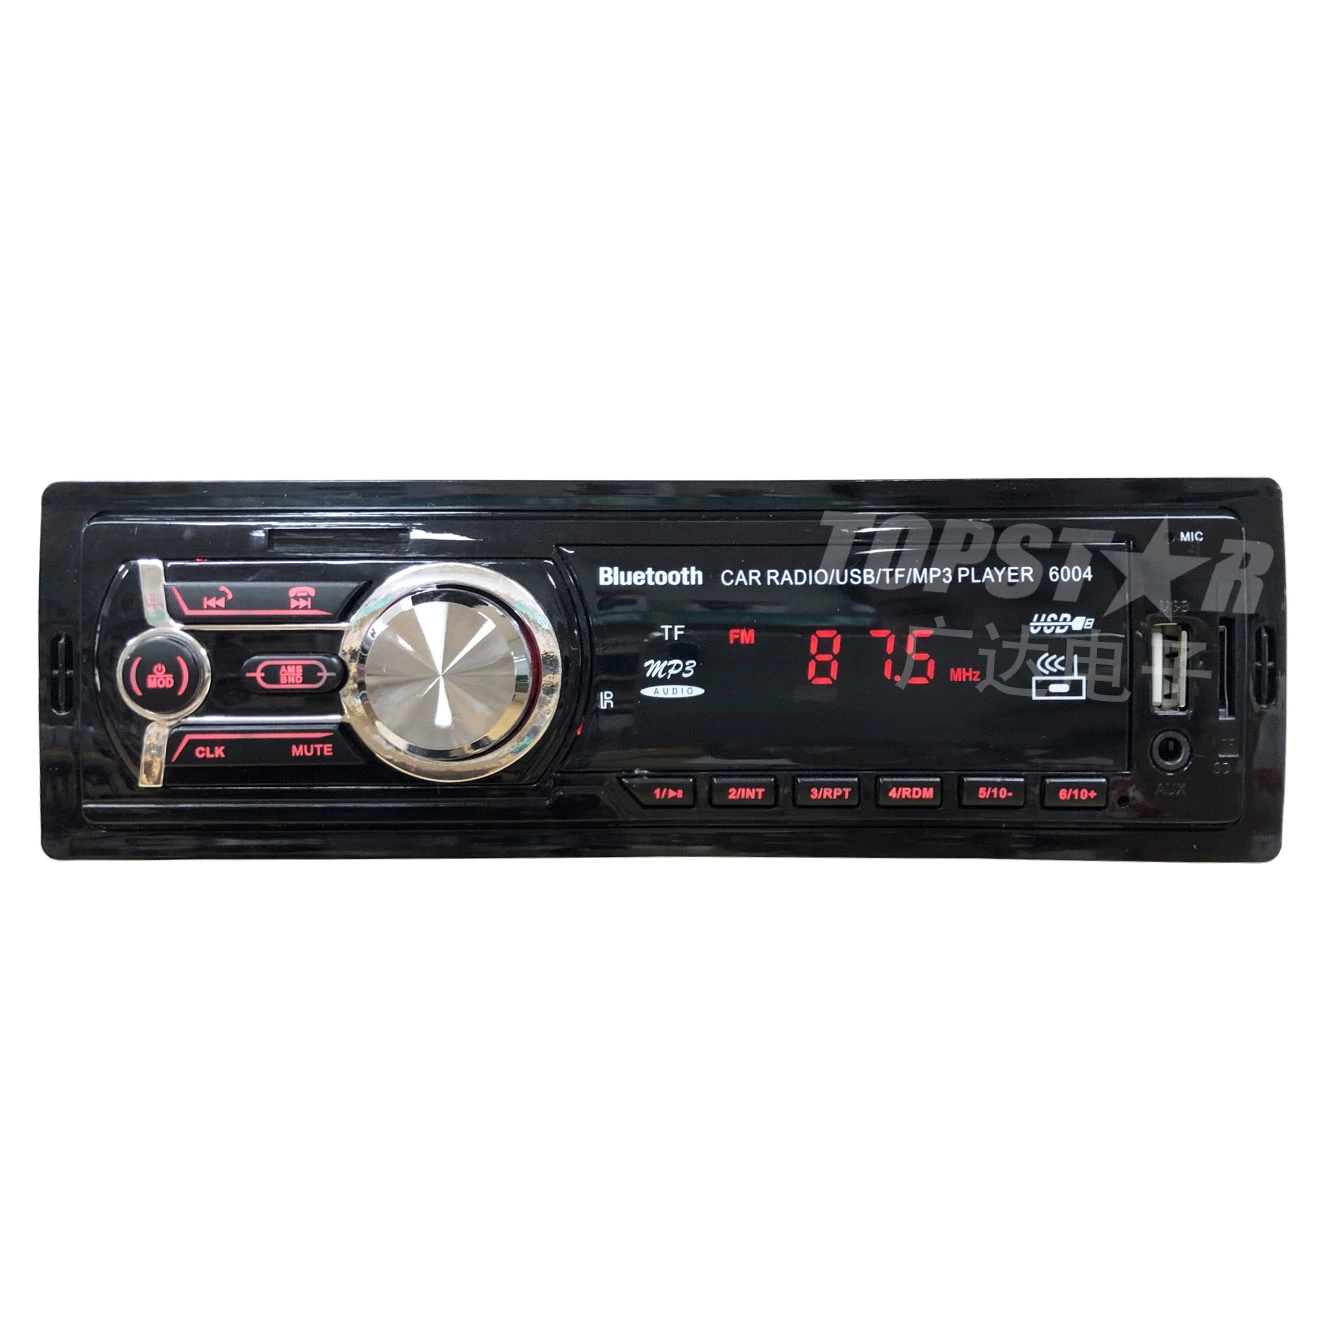 MP3 Player for Car Stereo Car Video Player Car MP3 Audio Auto Stereo Car Audio Fixed Panel Car MP3 Stereo Player